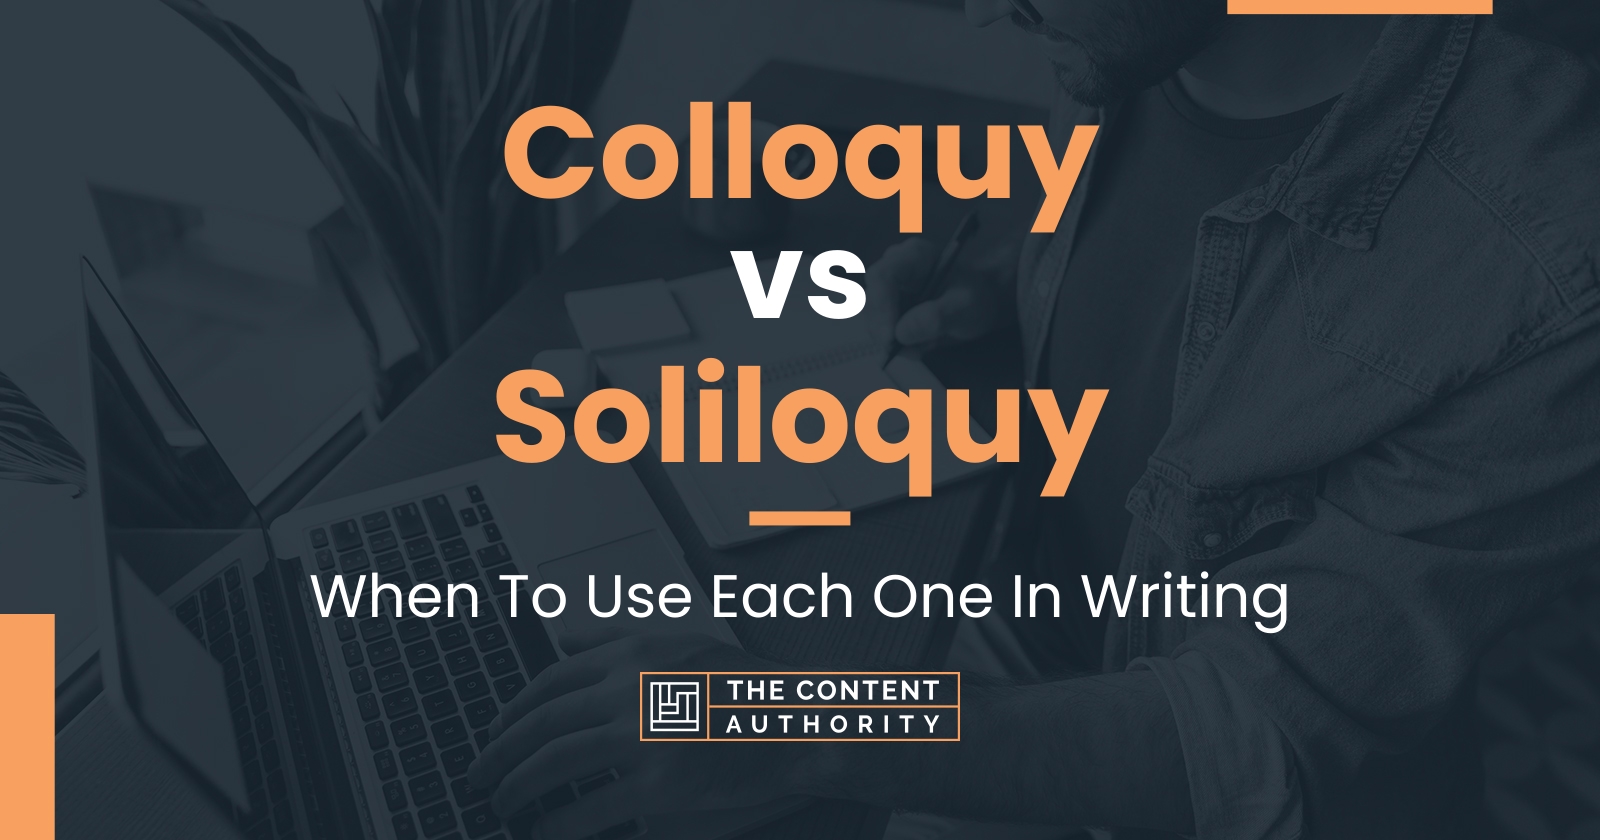 Colloquy vs Soliloquy: When To Use Each One In Writing